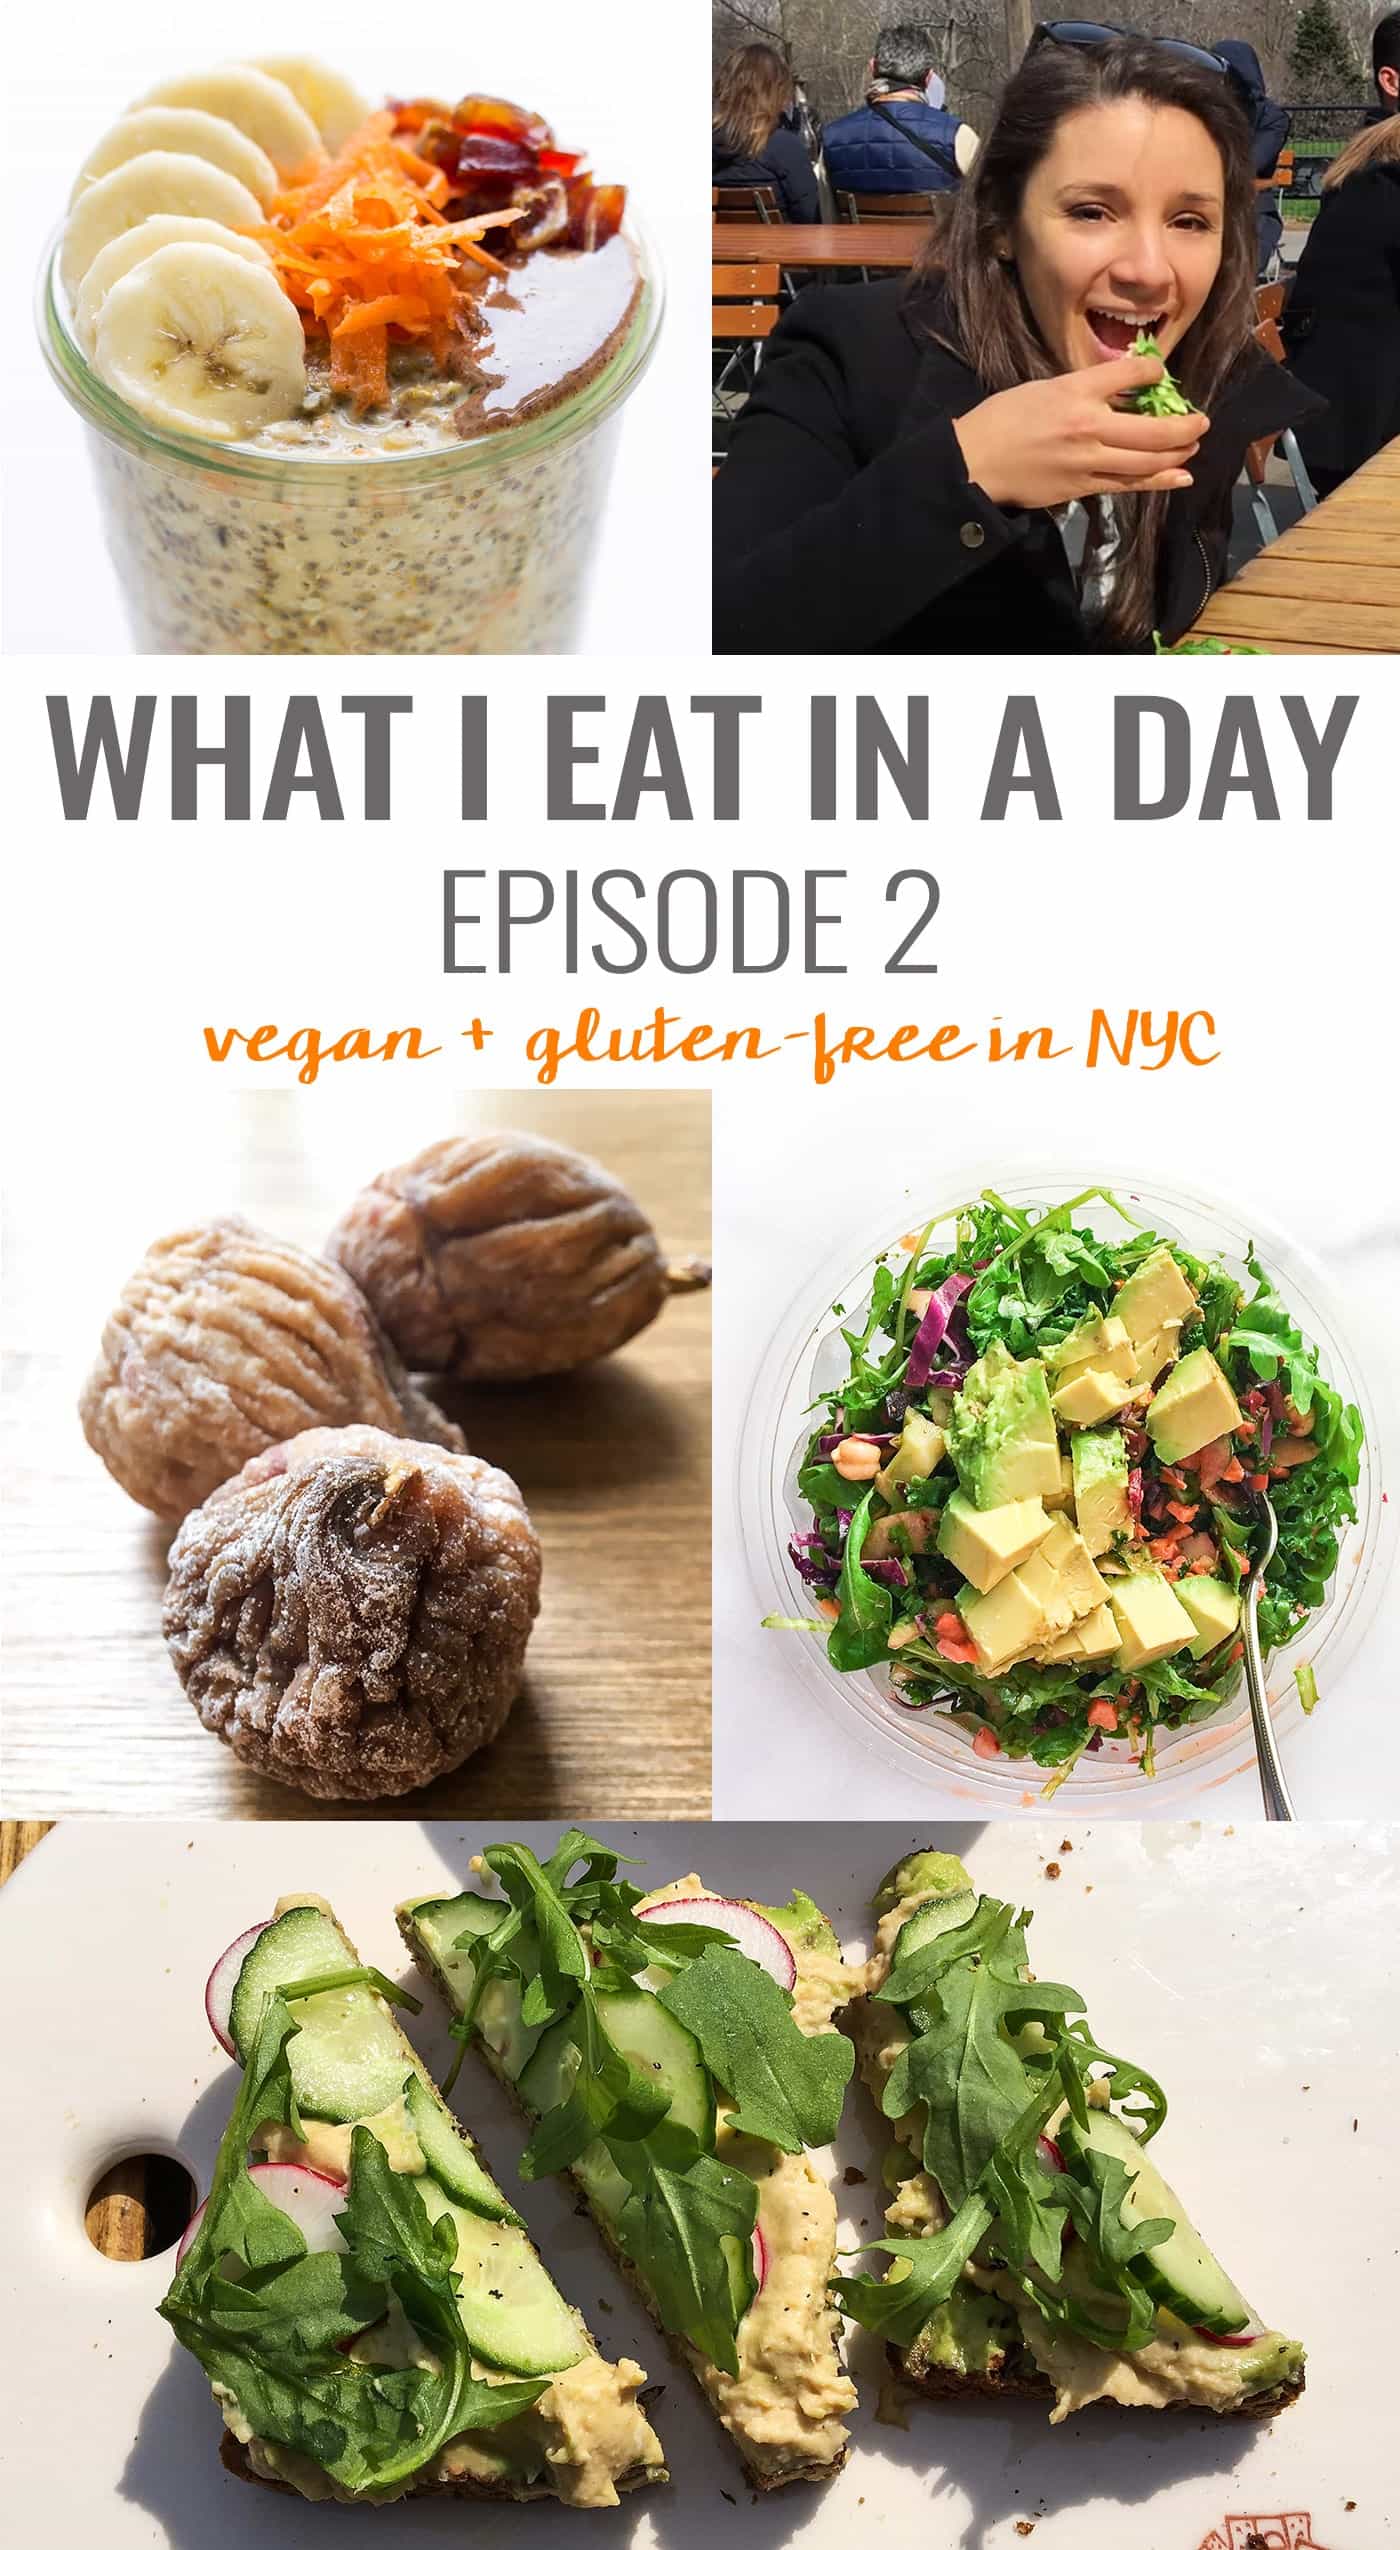 Ever wondered what it's like to eat vegan + gluten-free in NYC? Check out this fun video!